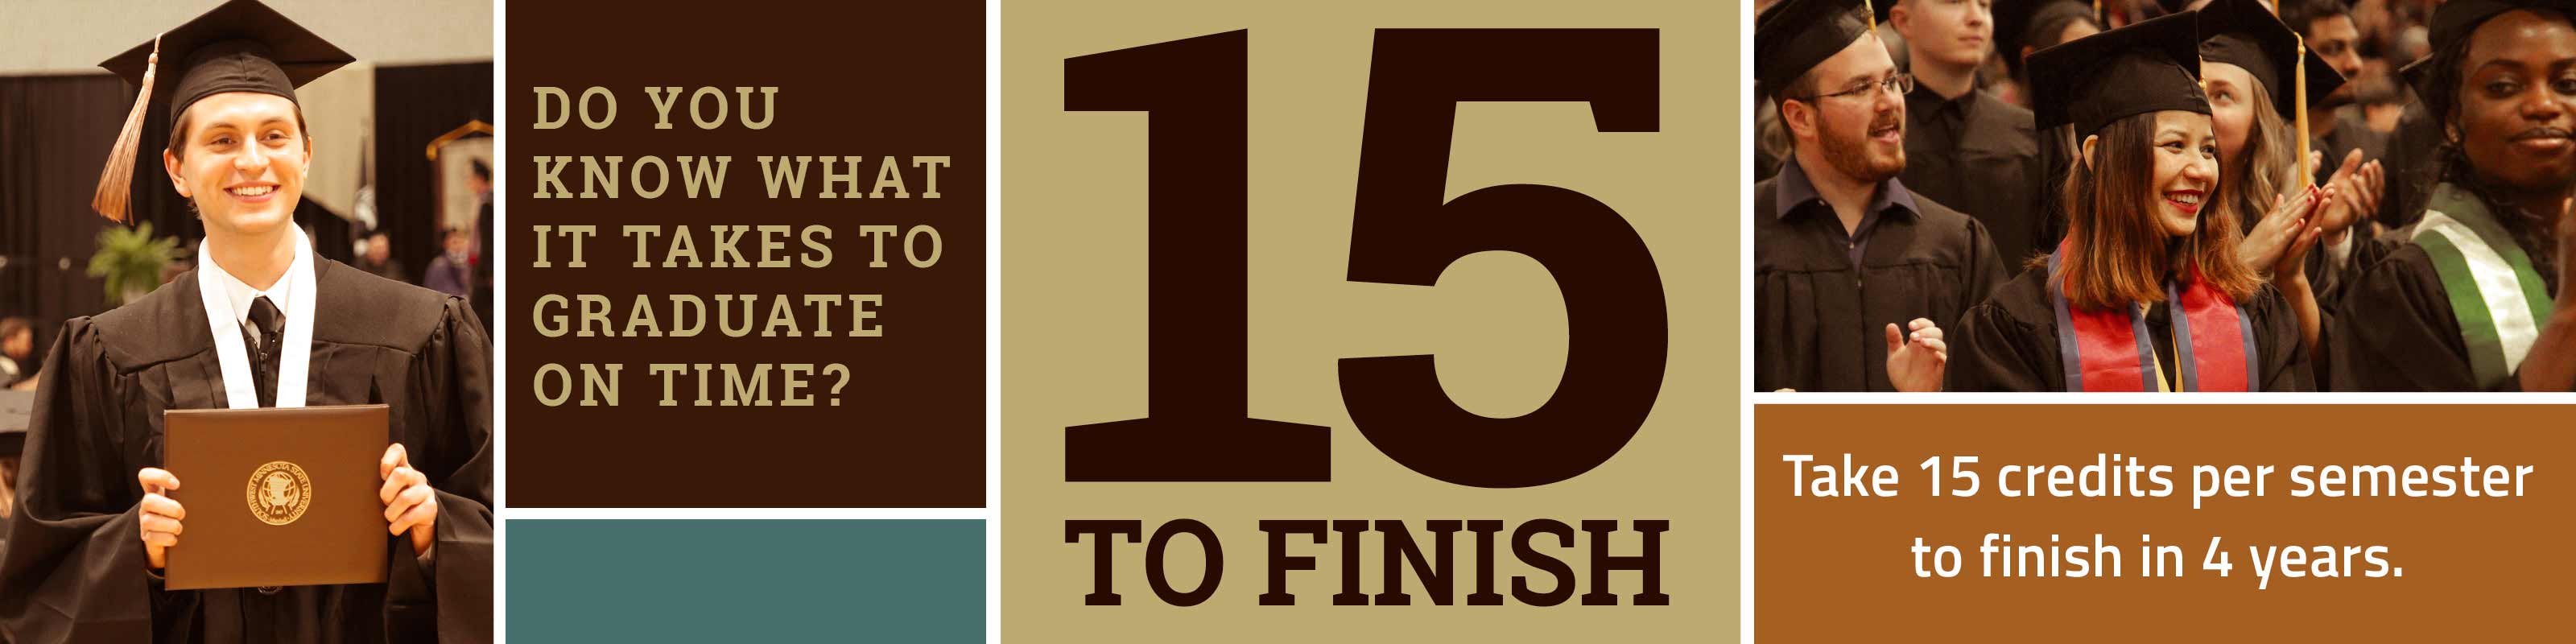 Do you know what it takes to graduate on time? 15 to Finish - Take 15 Credits per semester to finish in 4 years.